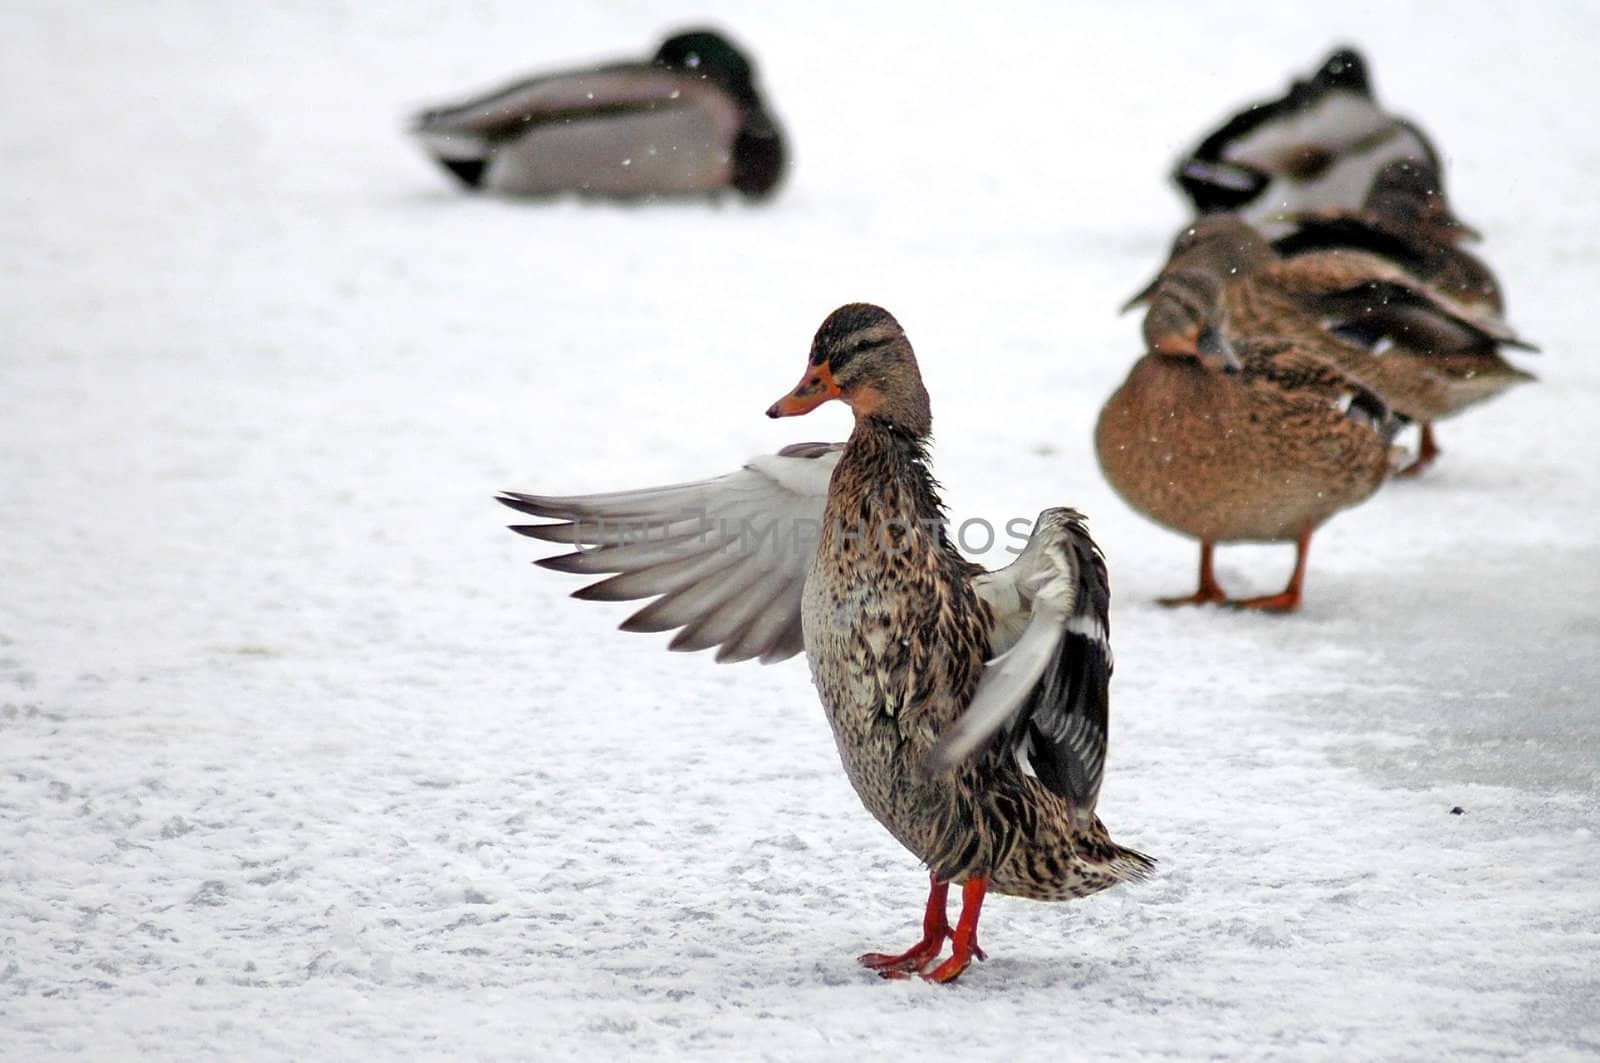 brown ducks on frozen pond, duck in front waving with wings